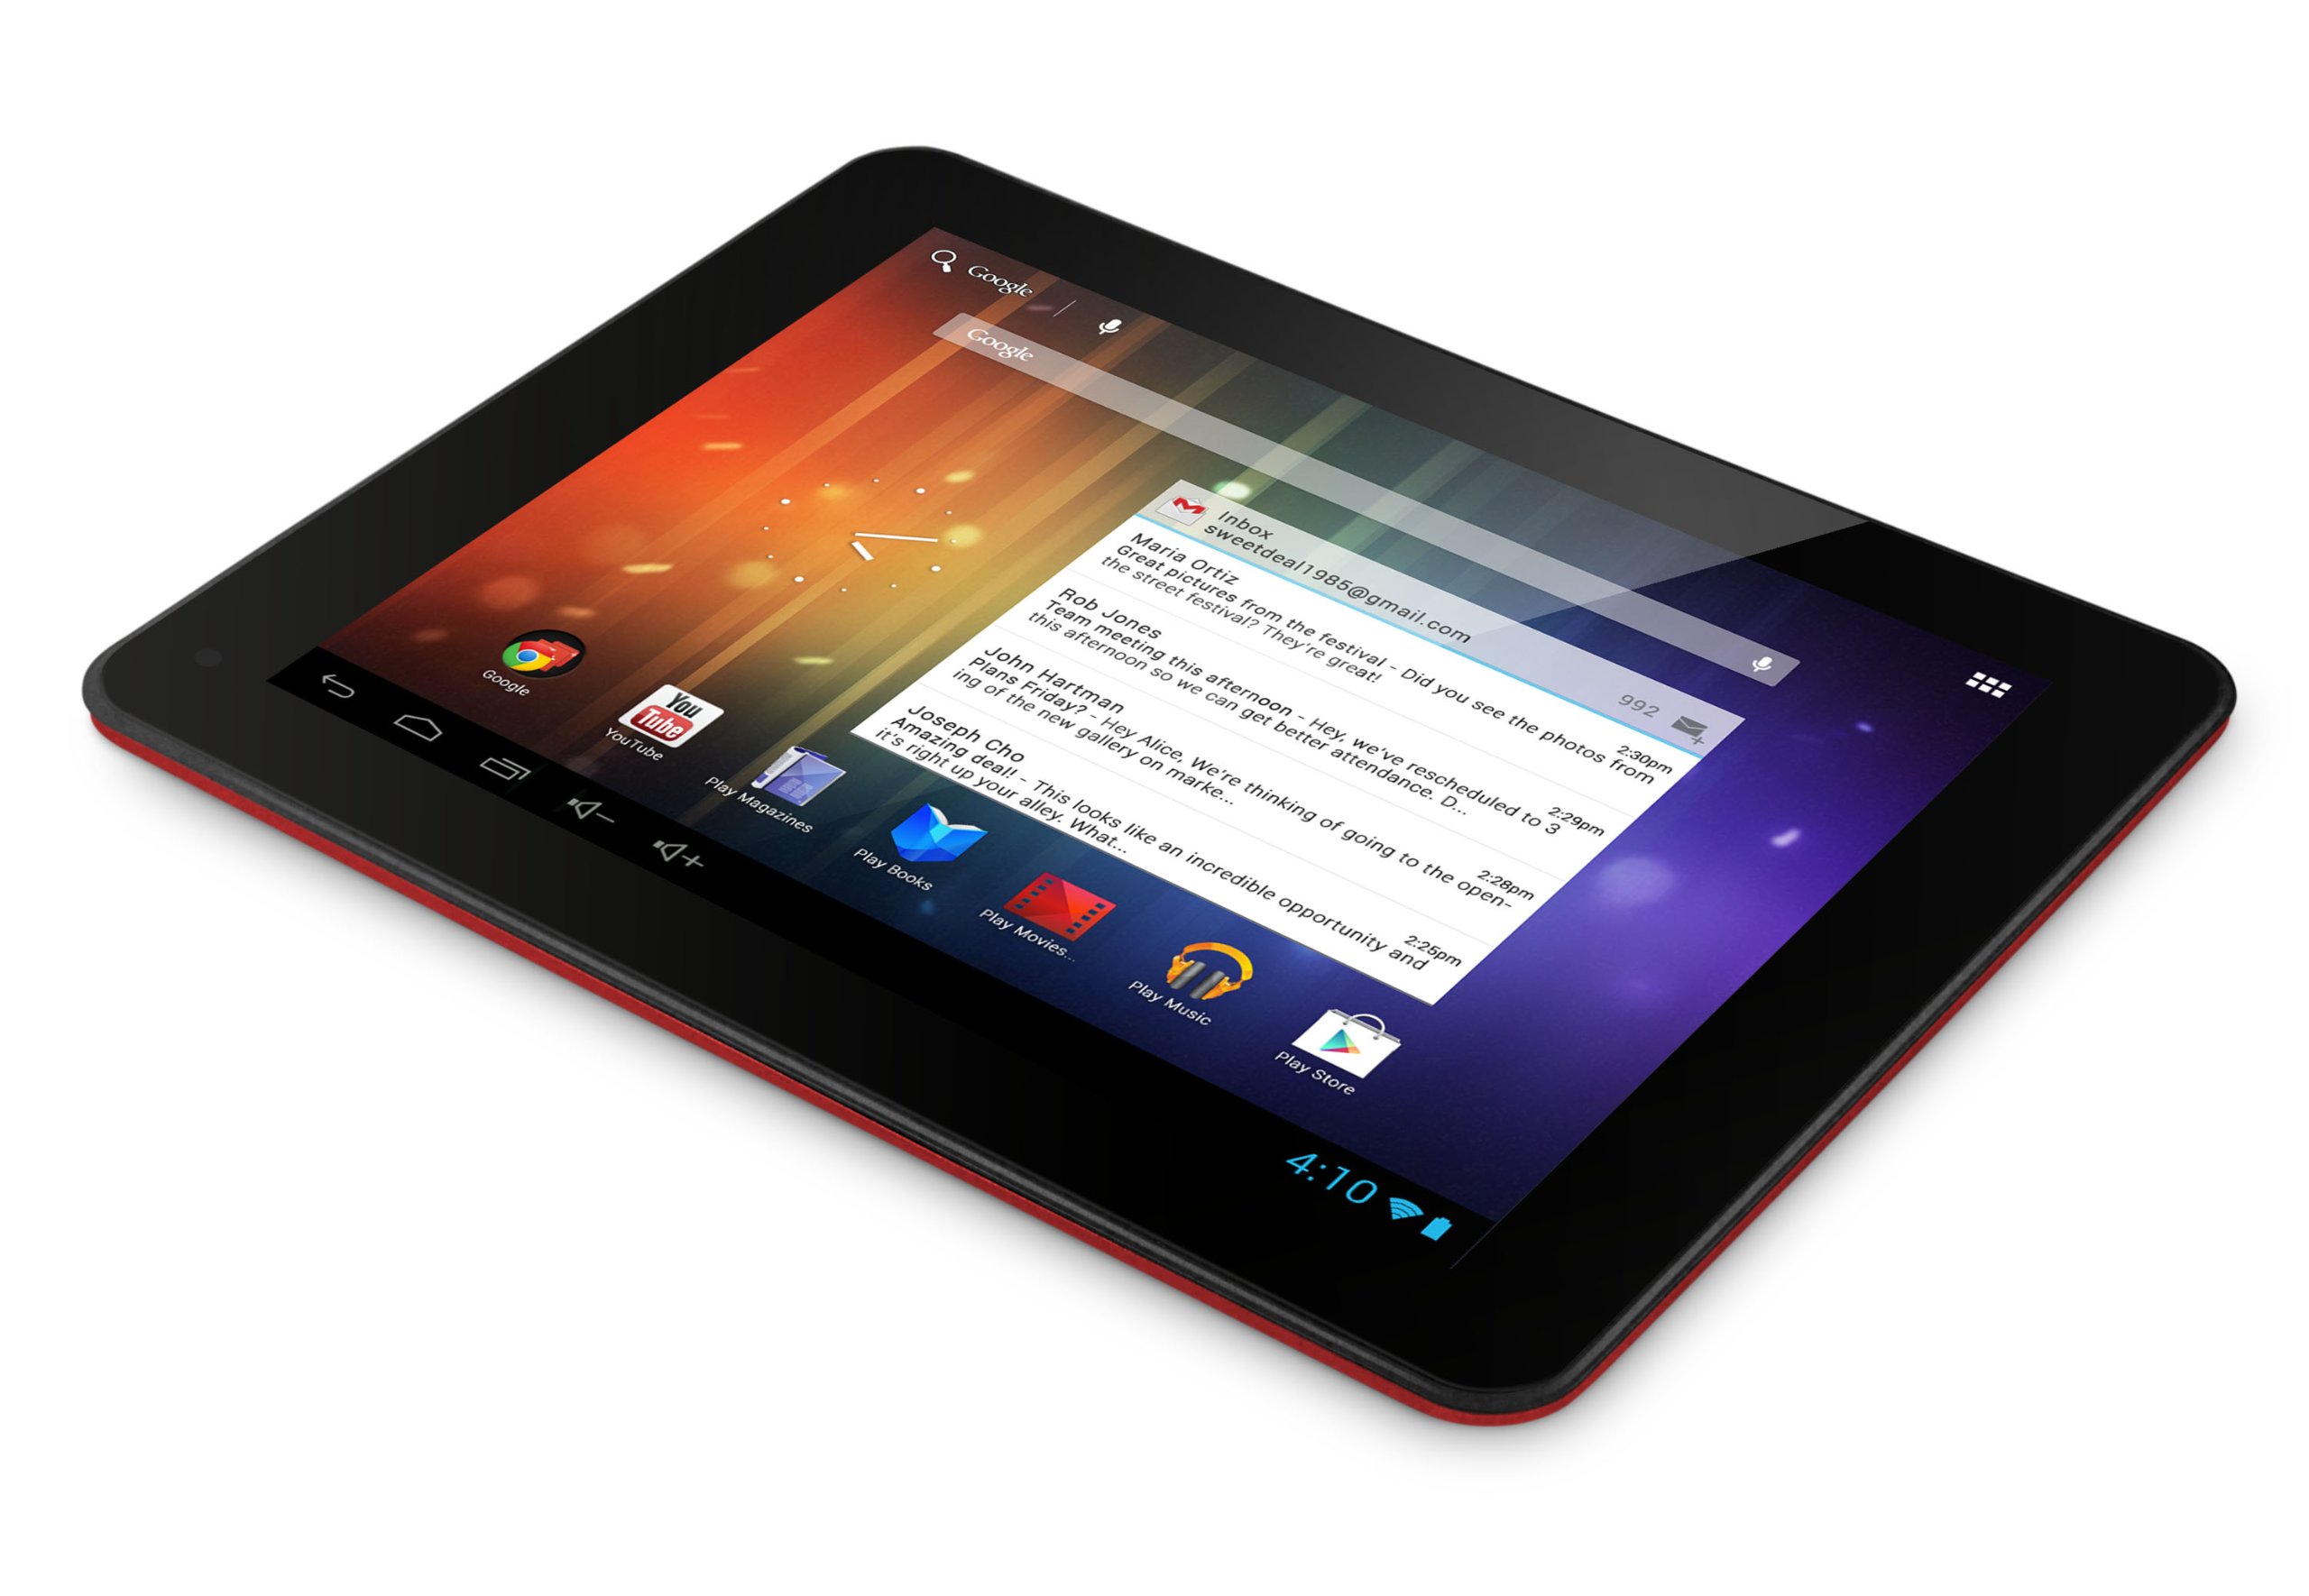 Ematic EGP008RD 8.0-Inch 8GB Pro Multi-Touch Tablet with Android 4.1 Jelly Bean (Red)